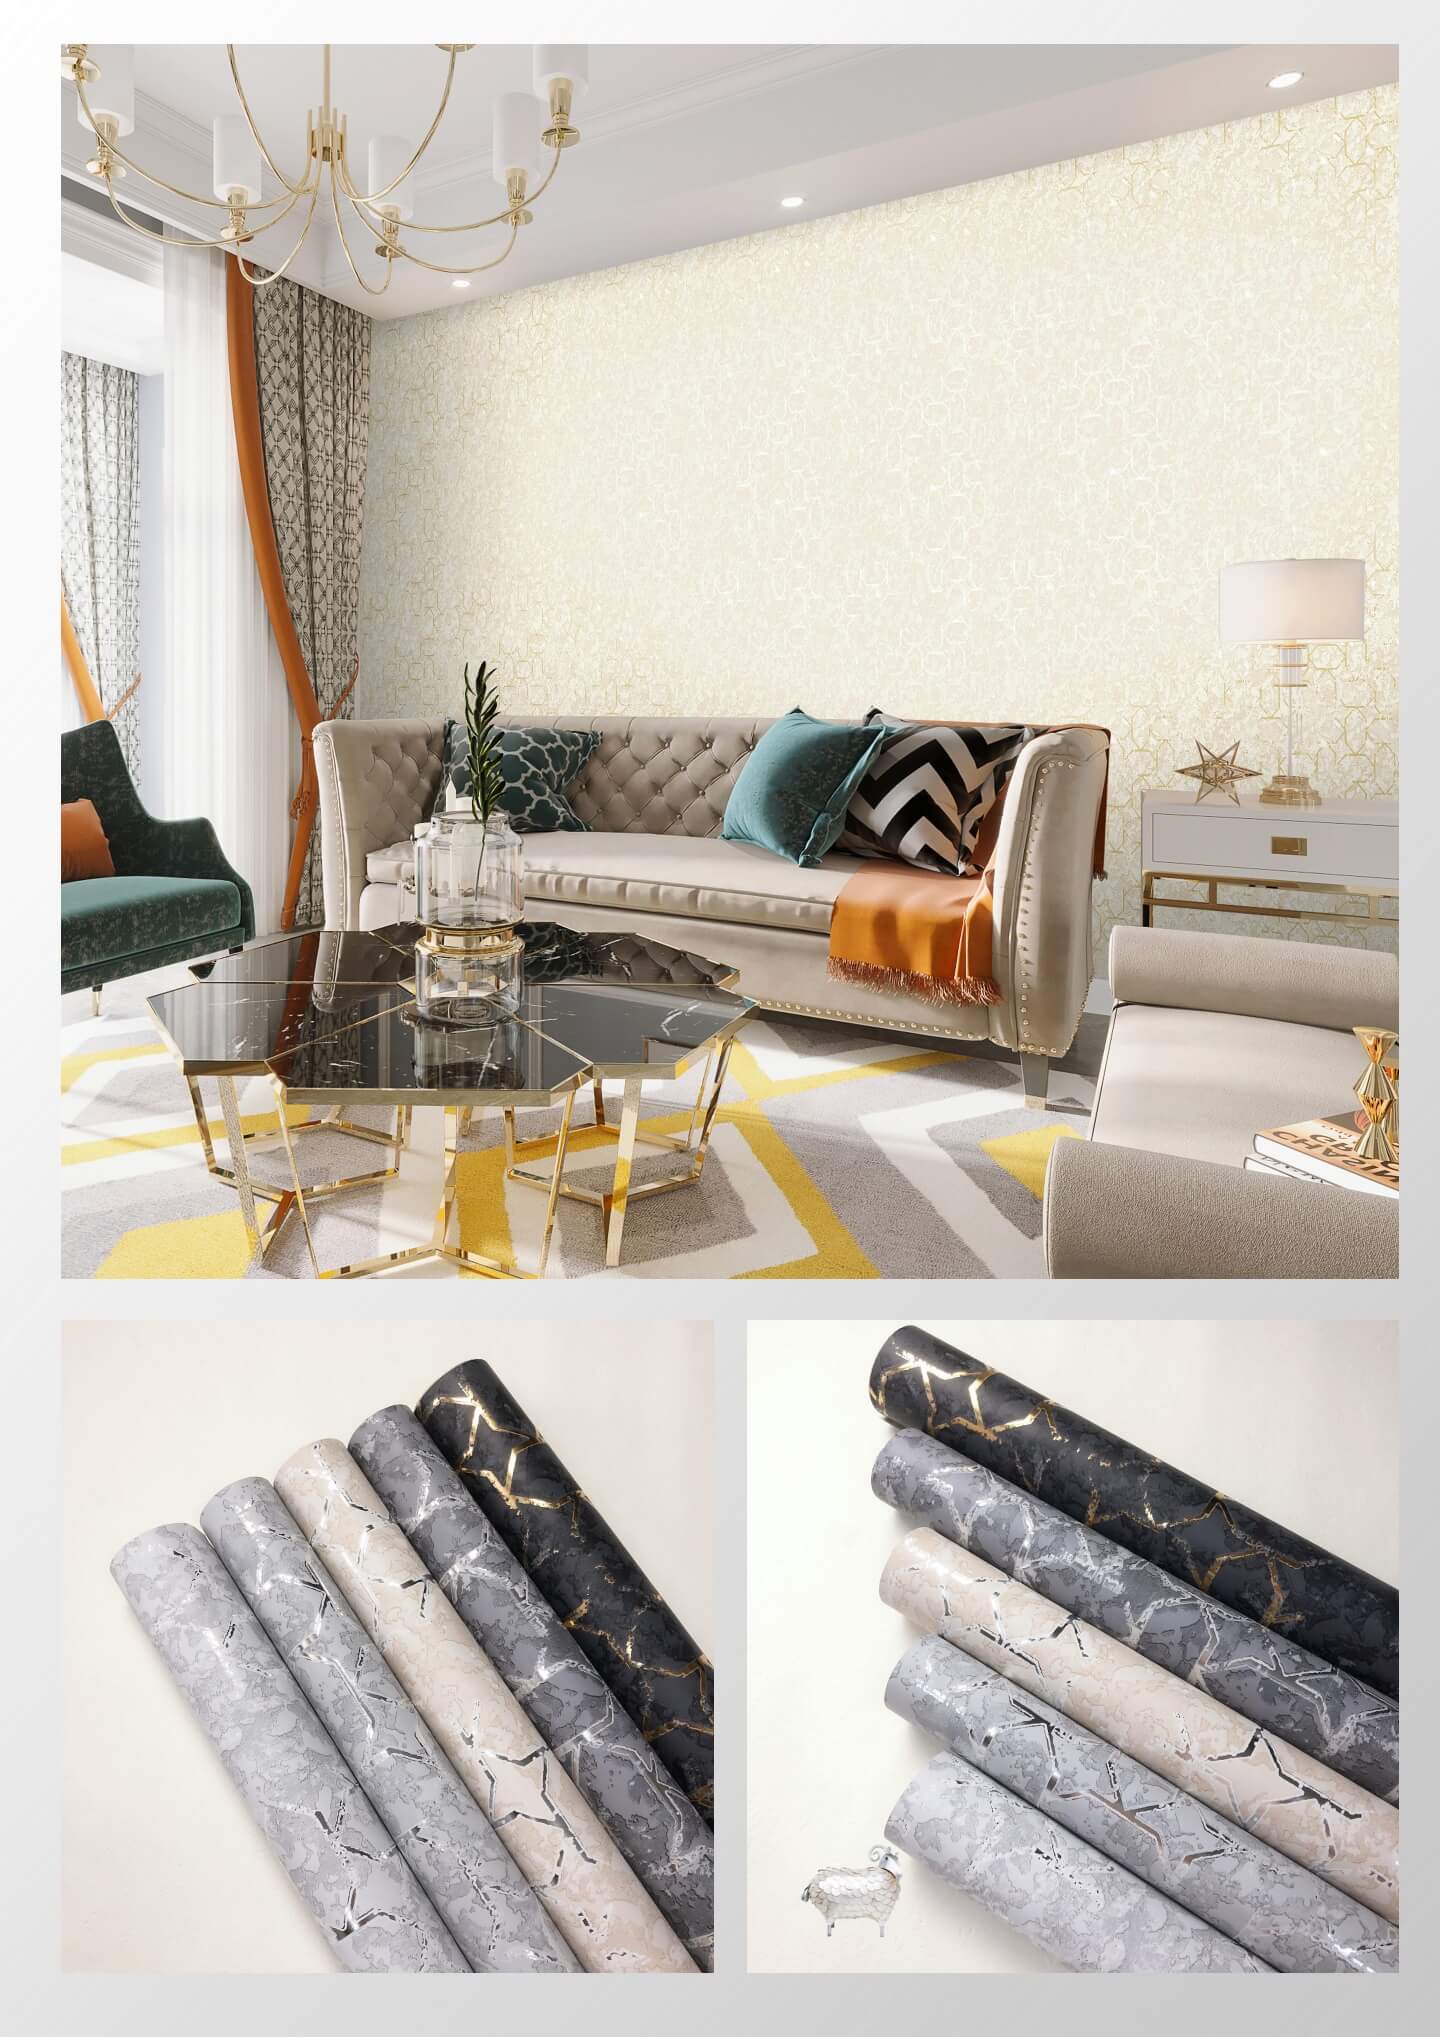 3D Metallic Wallpaper Wallcoverings For Home Hotel Wall Decoration (12)